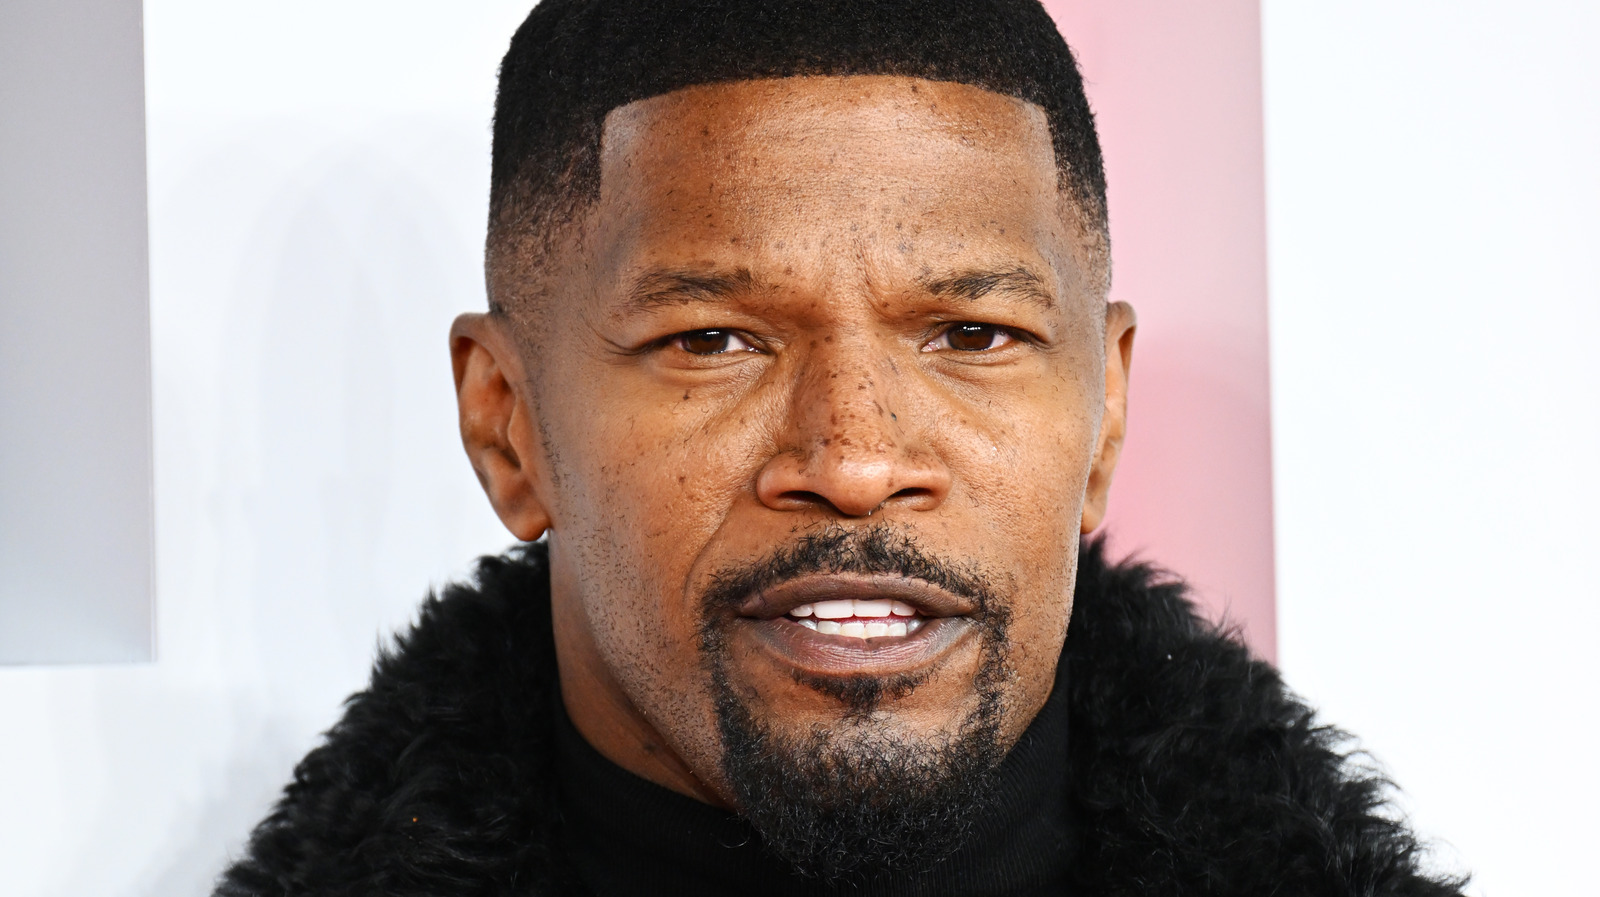 Mike Tyson Fuels Speculation About Jamie Foxx's Hospitalization